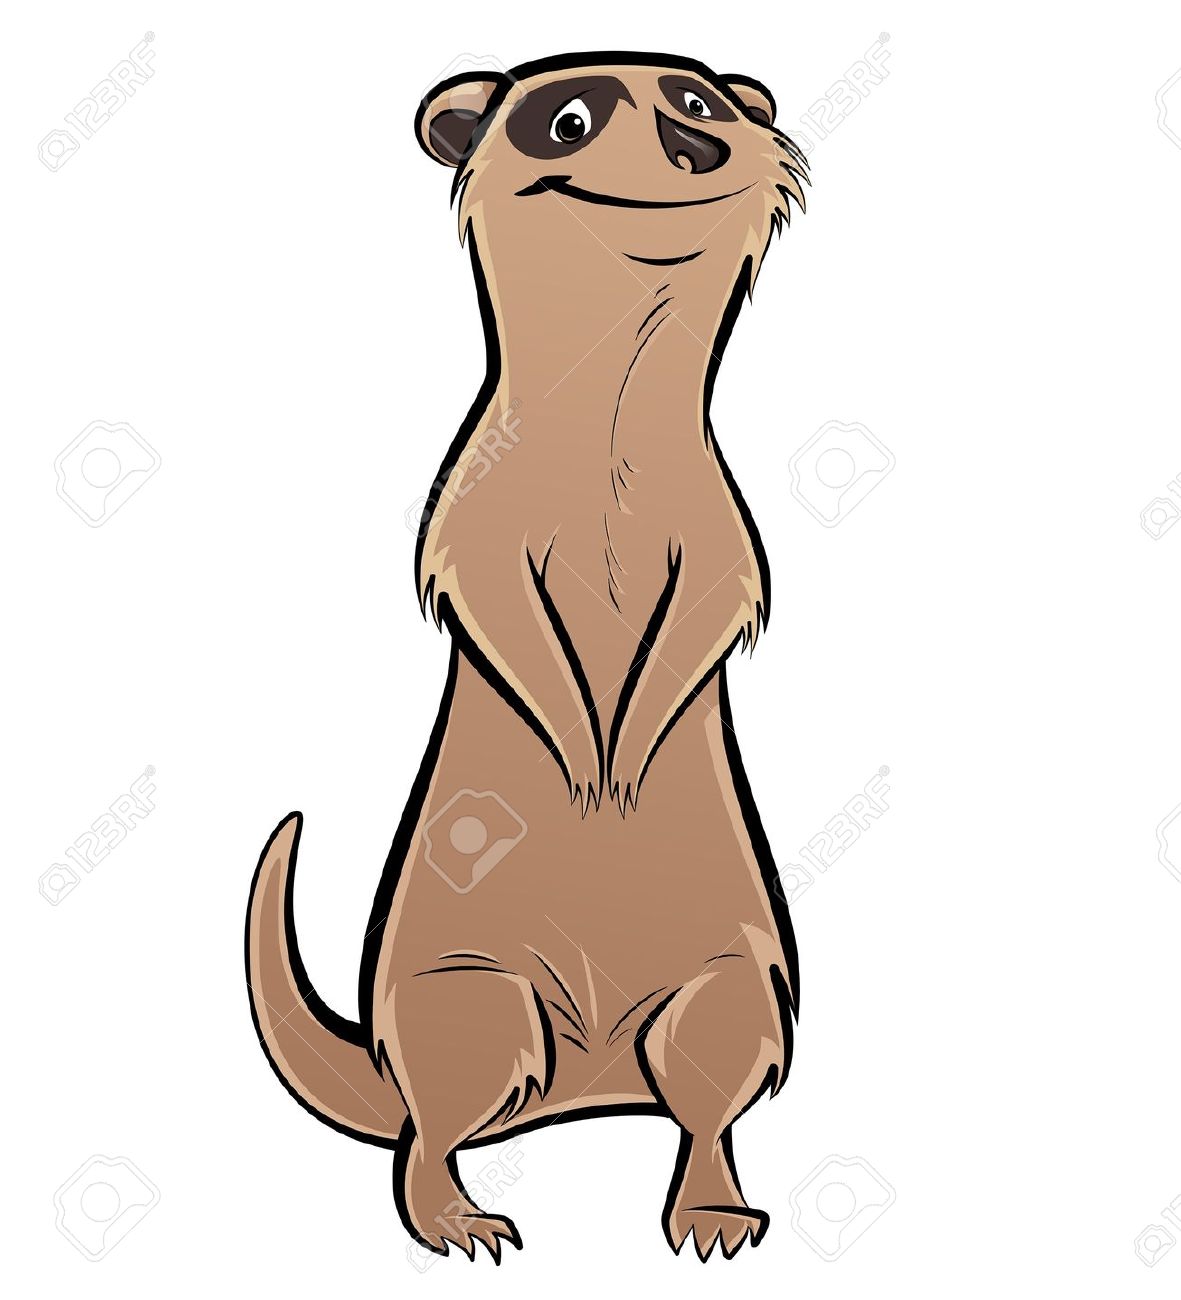 Mongoose clipart #4, Download drawings